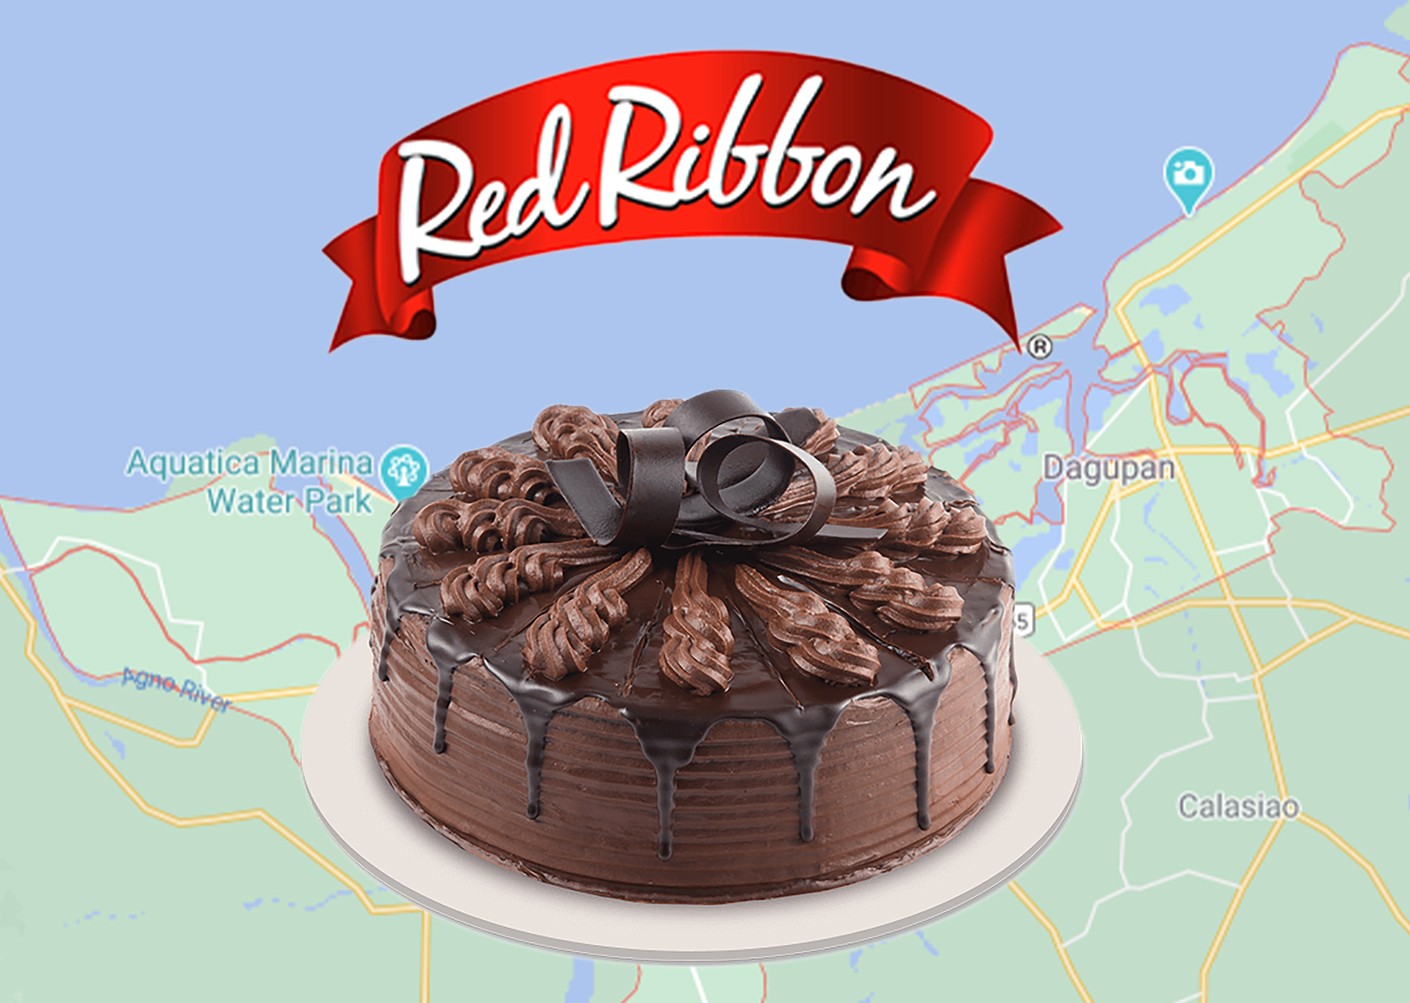 We Deliver Red Ribbon Cakes in Pangasinan